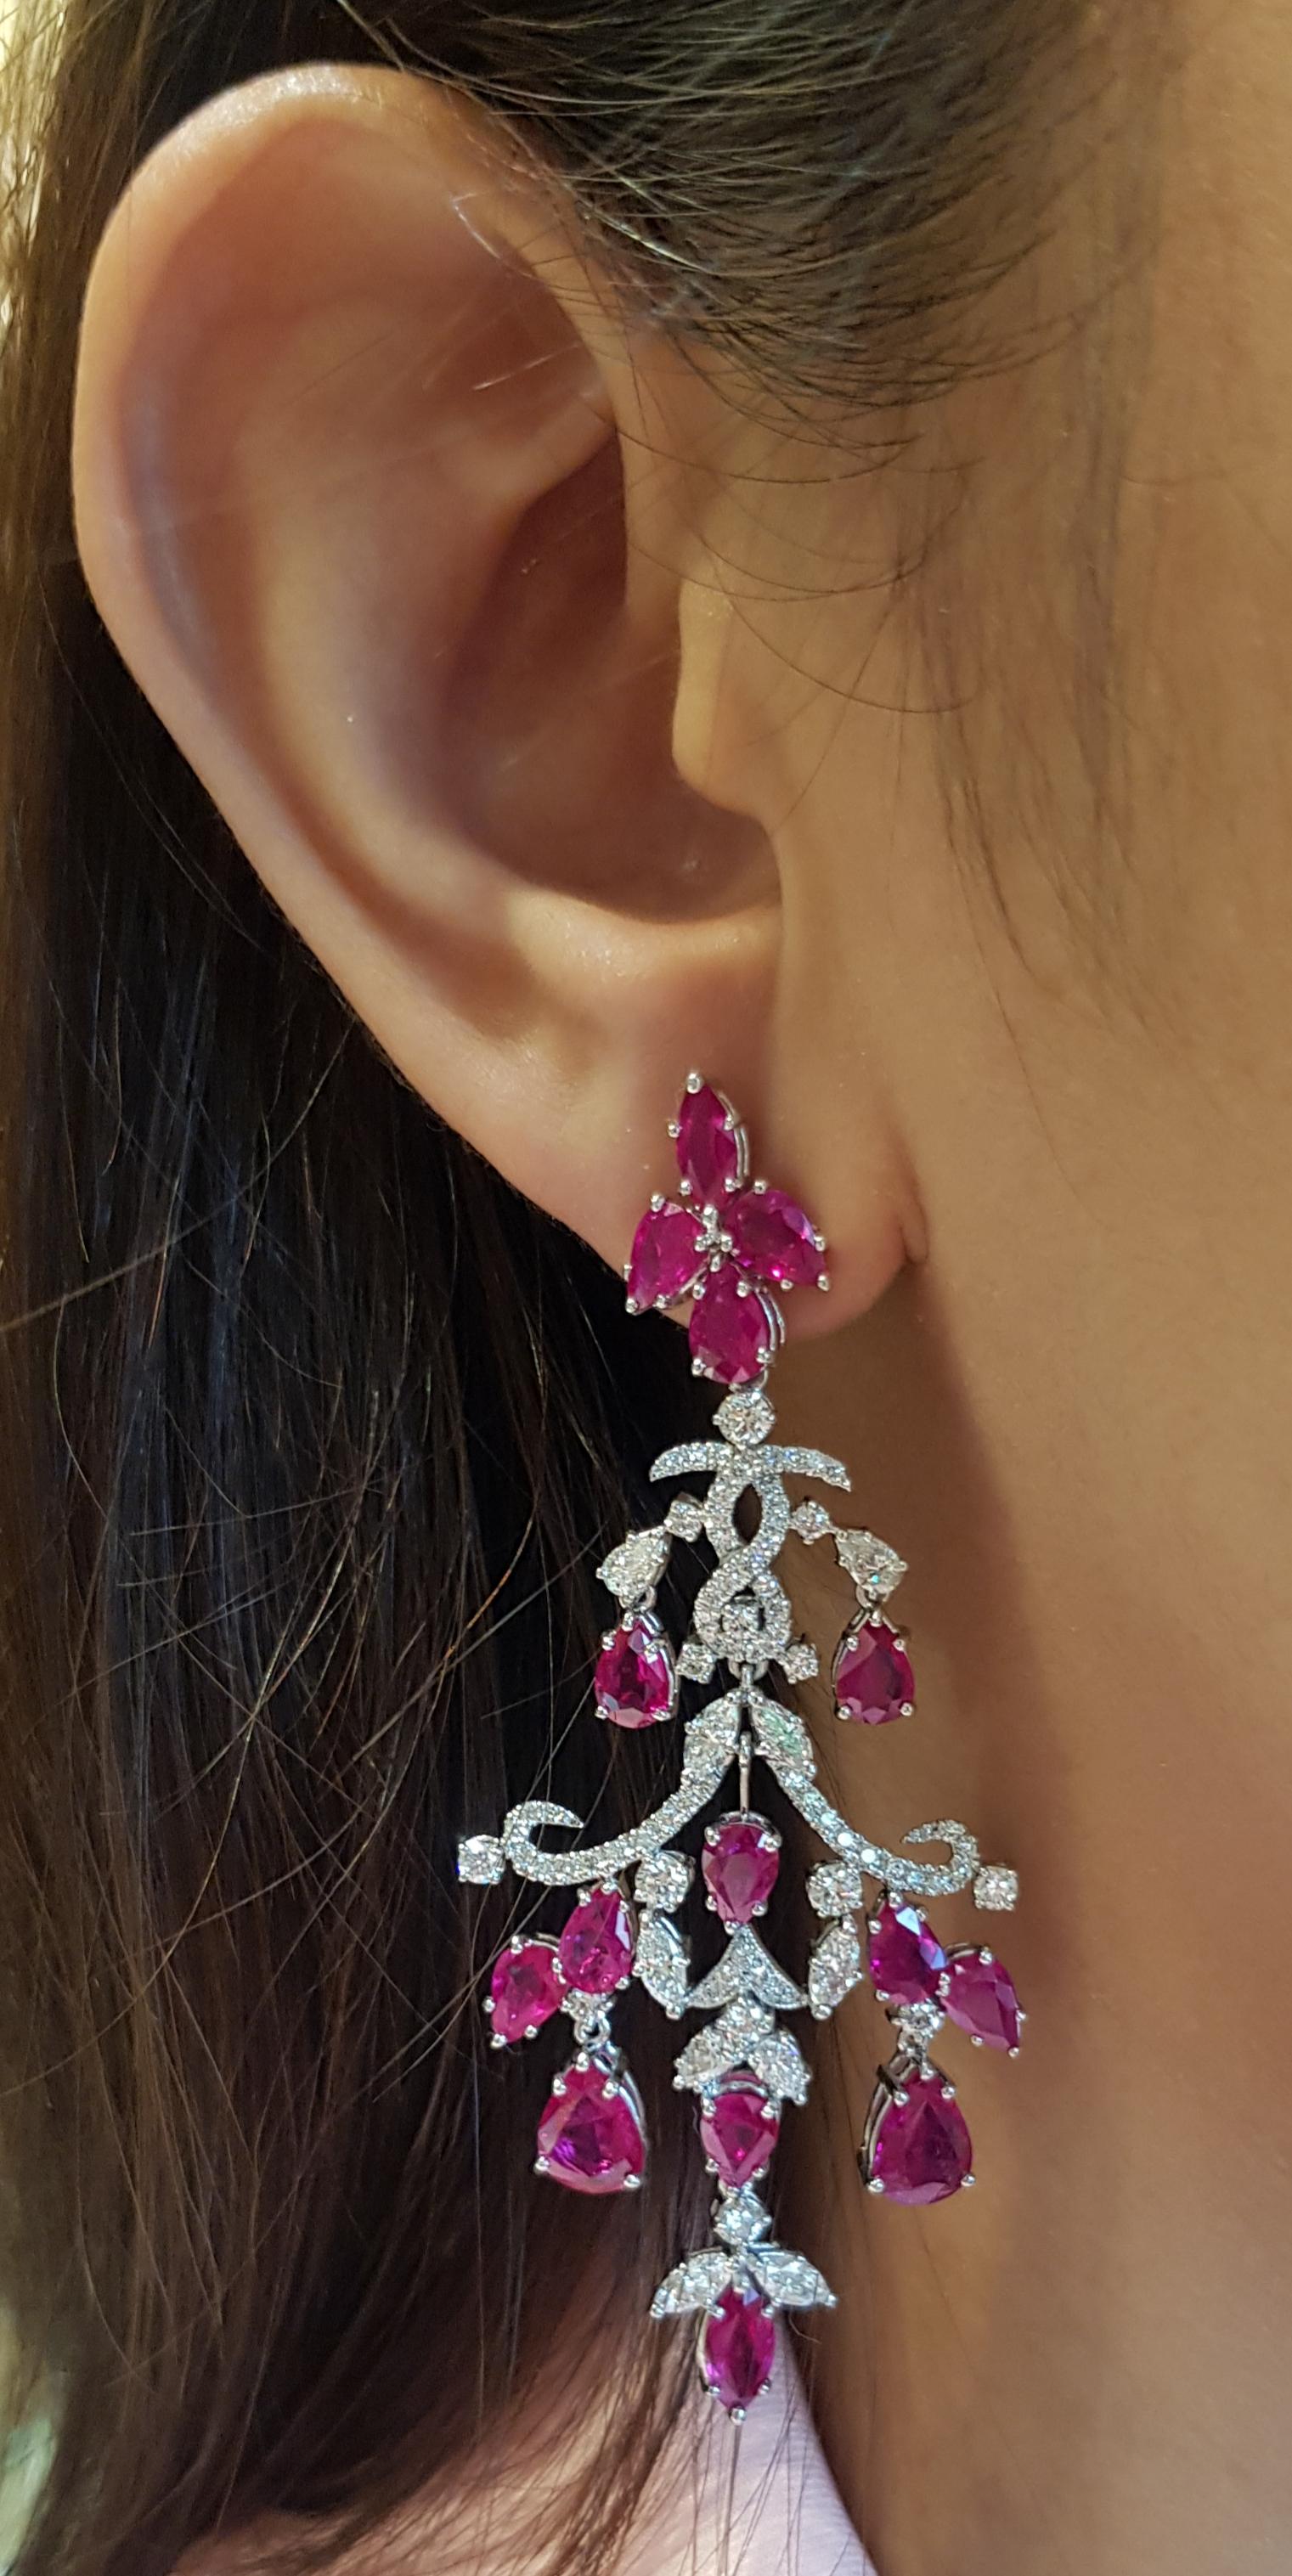 Ruby 14.40 carats with Diamond 3.75 carats Earrings set in 18 Karat White Gold Settings

Width:  3.0 cm 
Length:  7.4 cm
Total Weight: 22.54 grams

